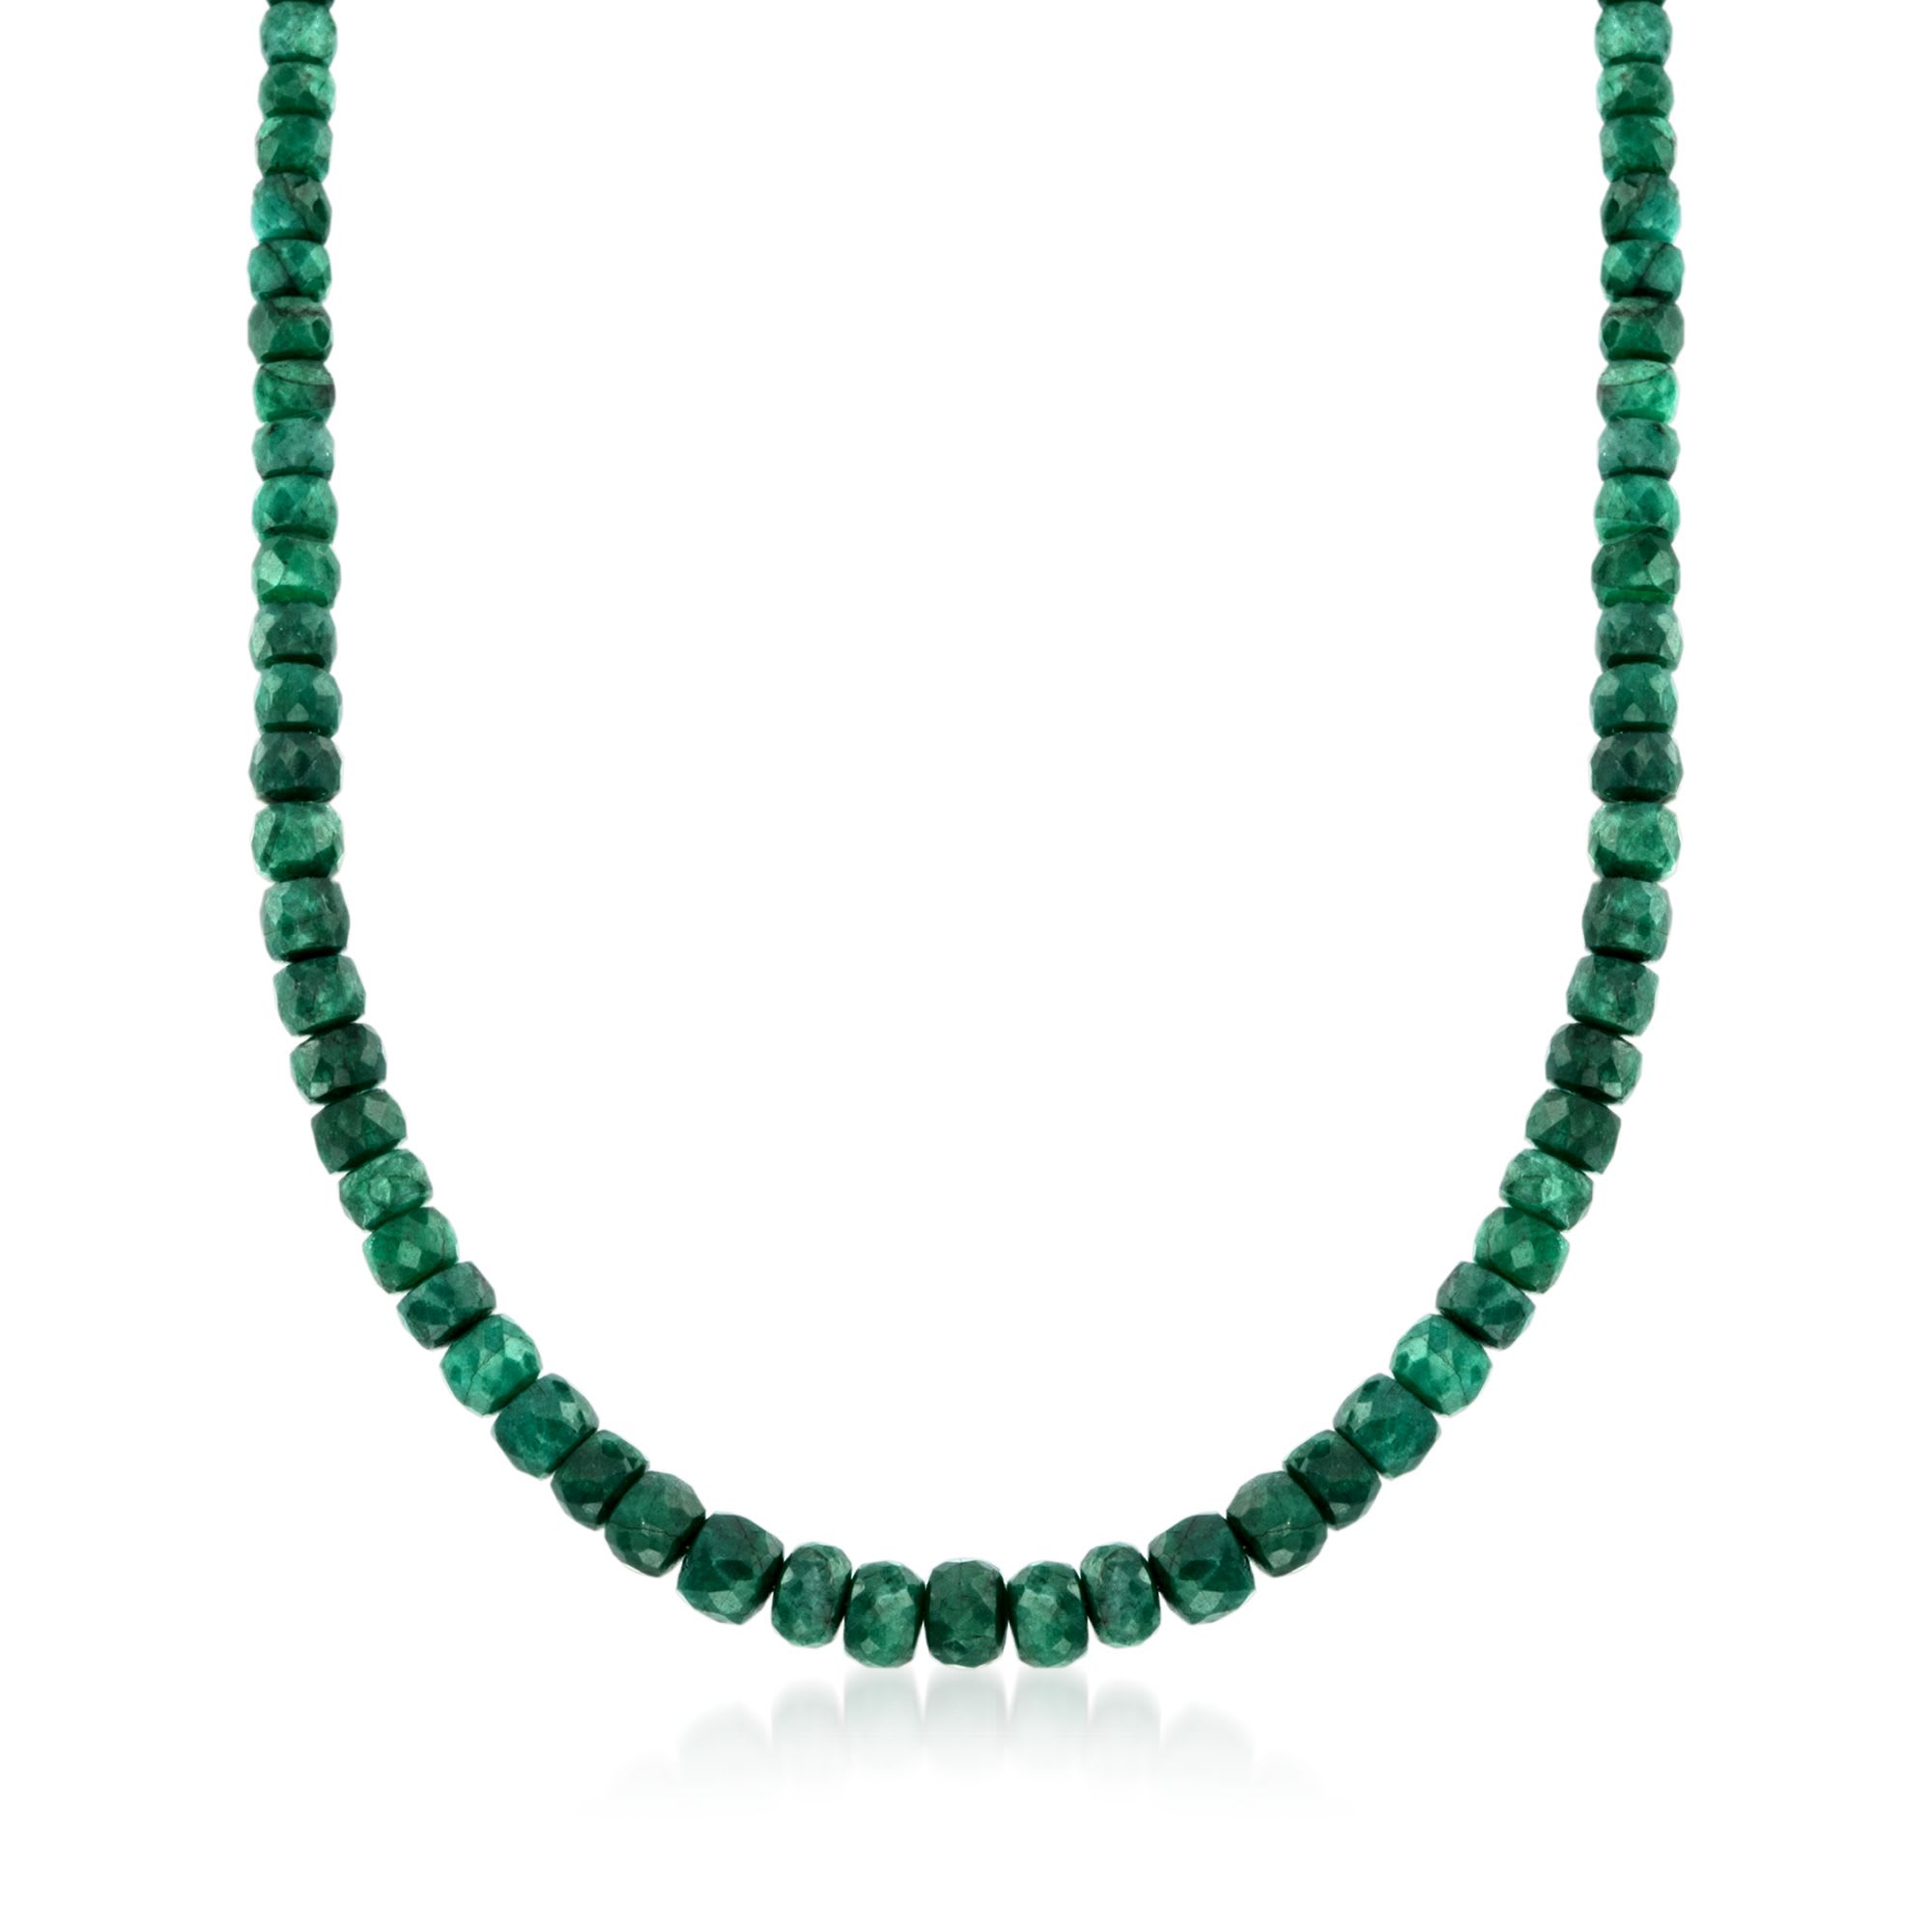 90.00 ct. t.w. Emerald Bead Necklace with Sterling Silver | Ross-Simons